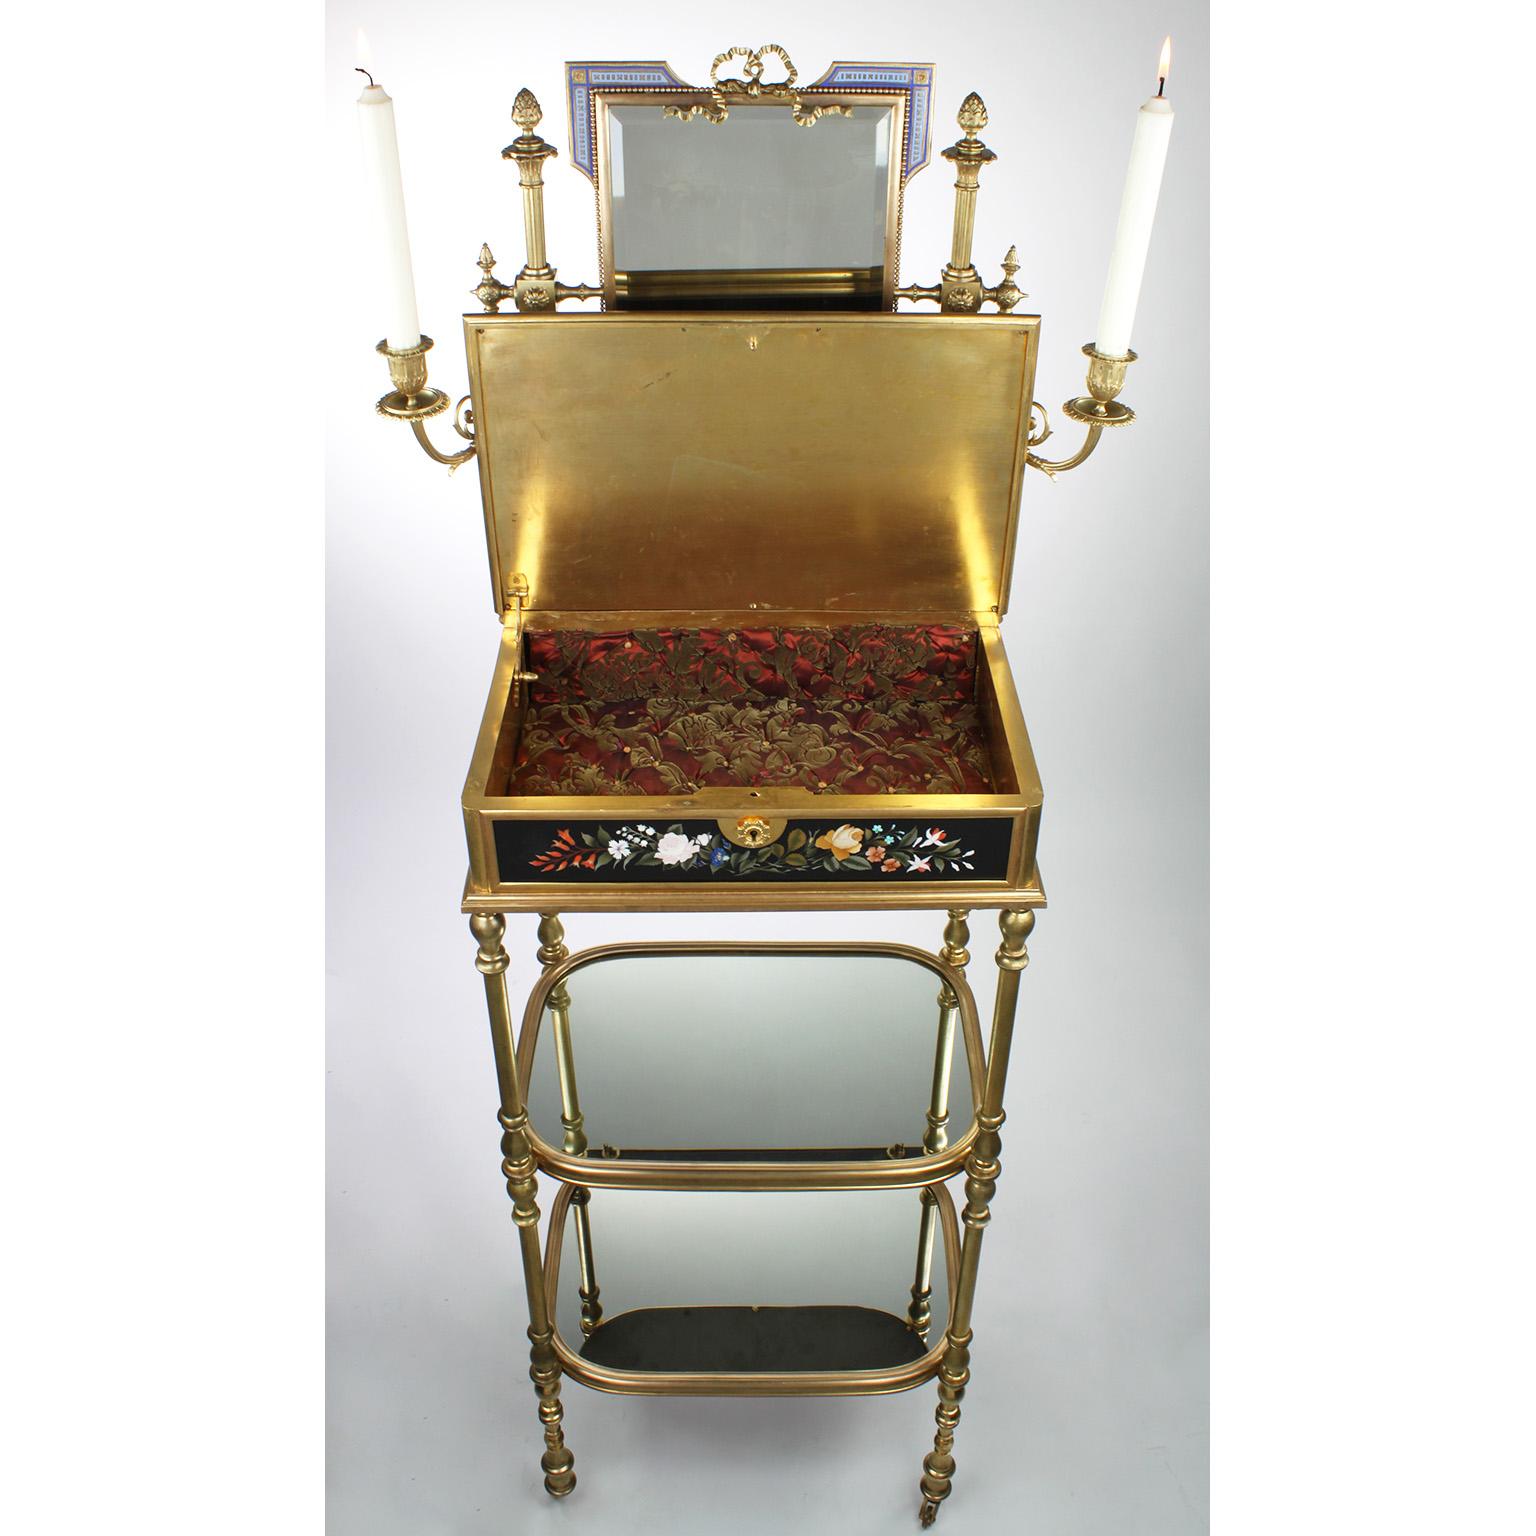 French 19th Century Gilt-Bronze and Pietra Dura Vanity Stand, Attr. Tahan, Paris For Sale 3